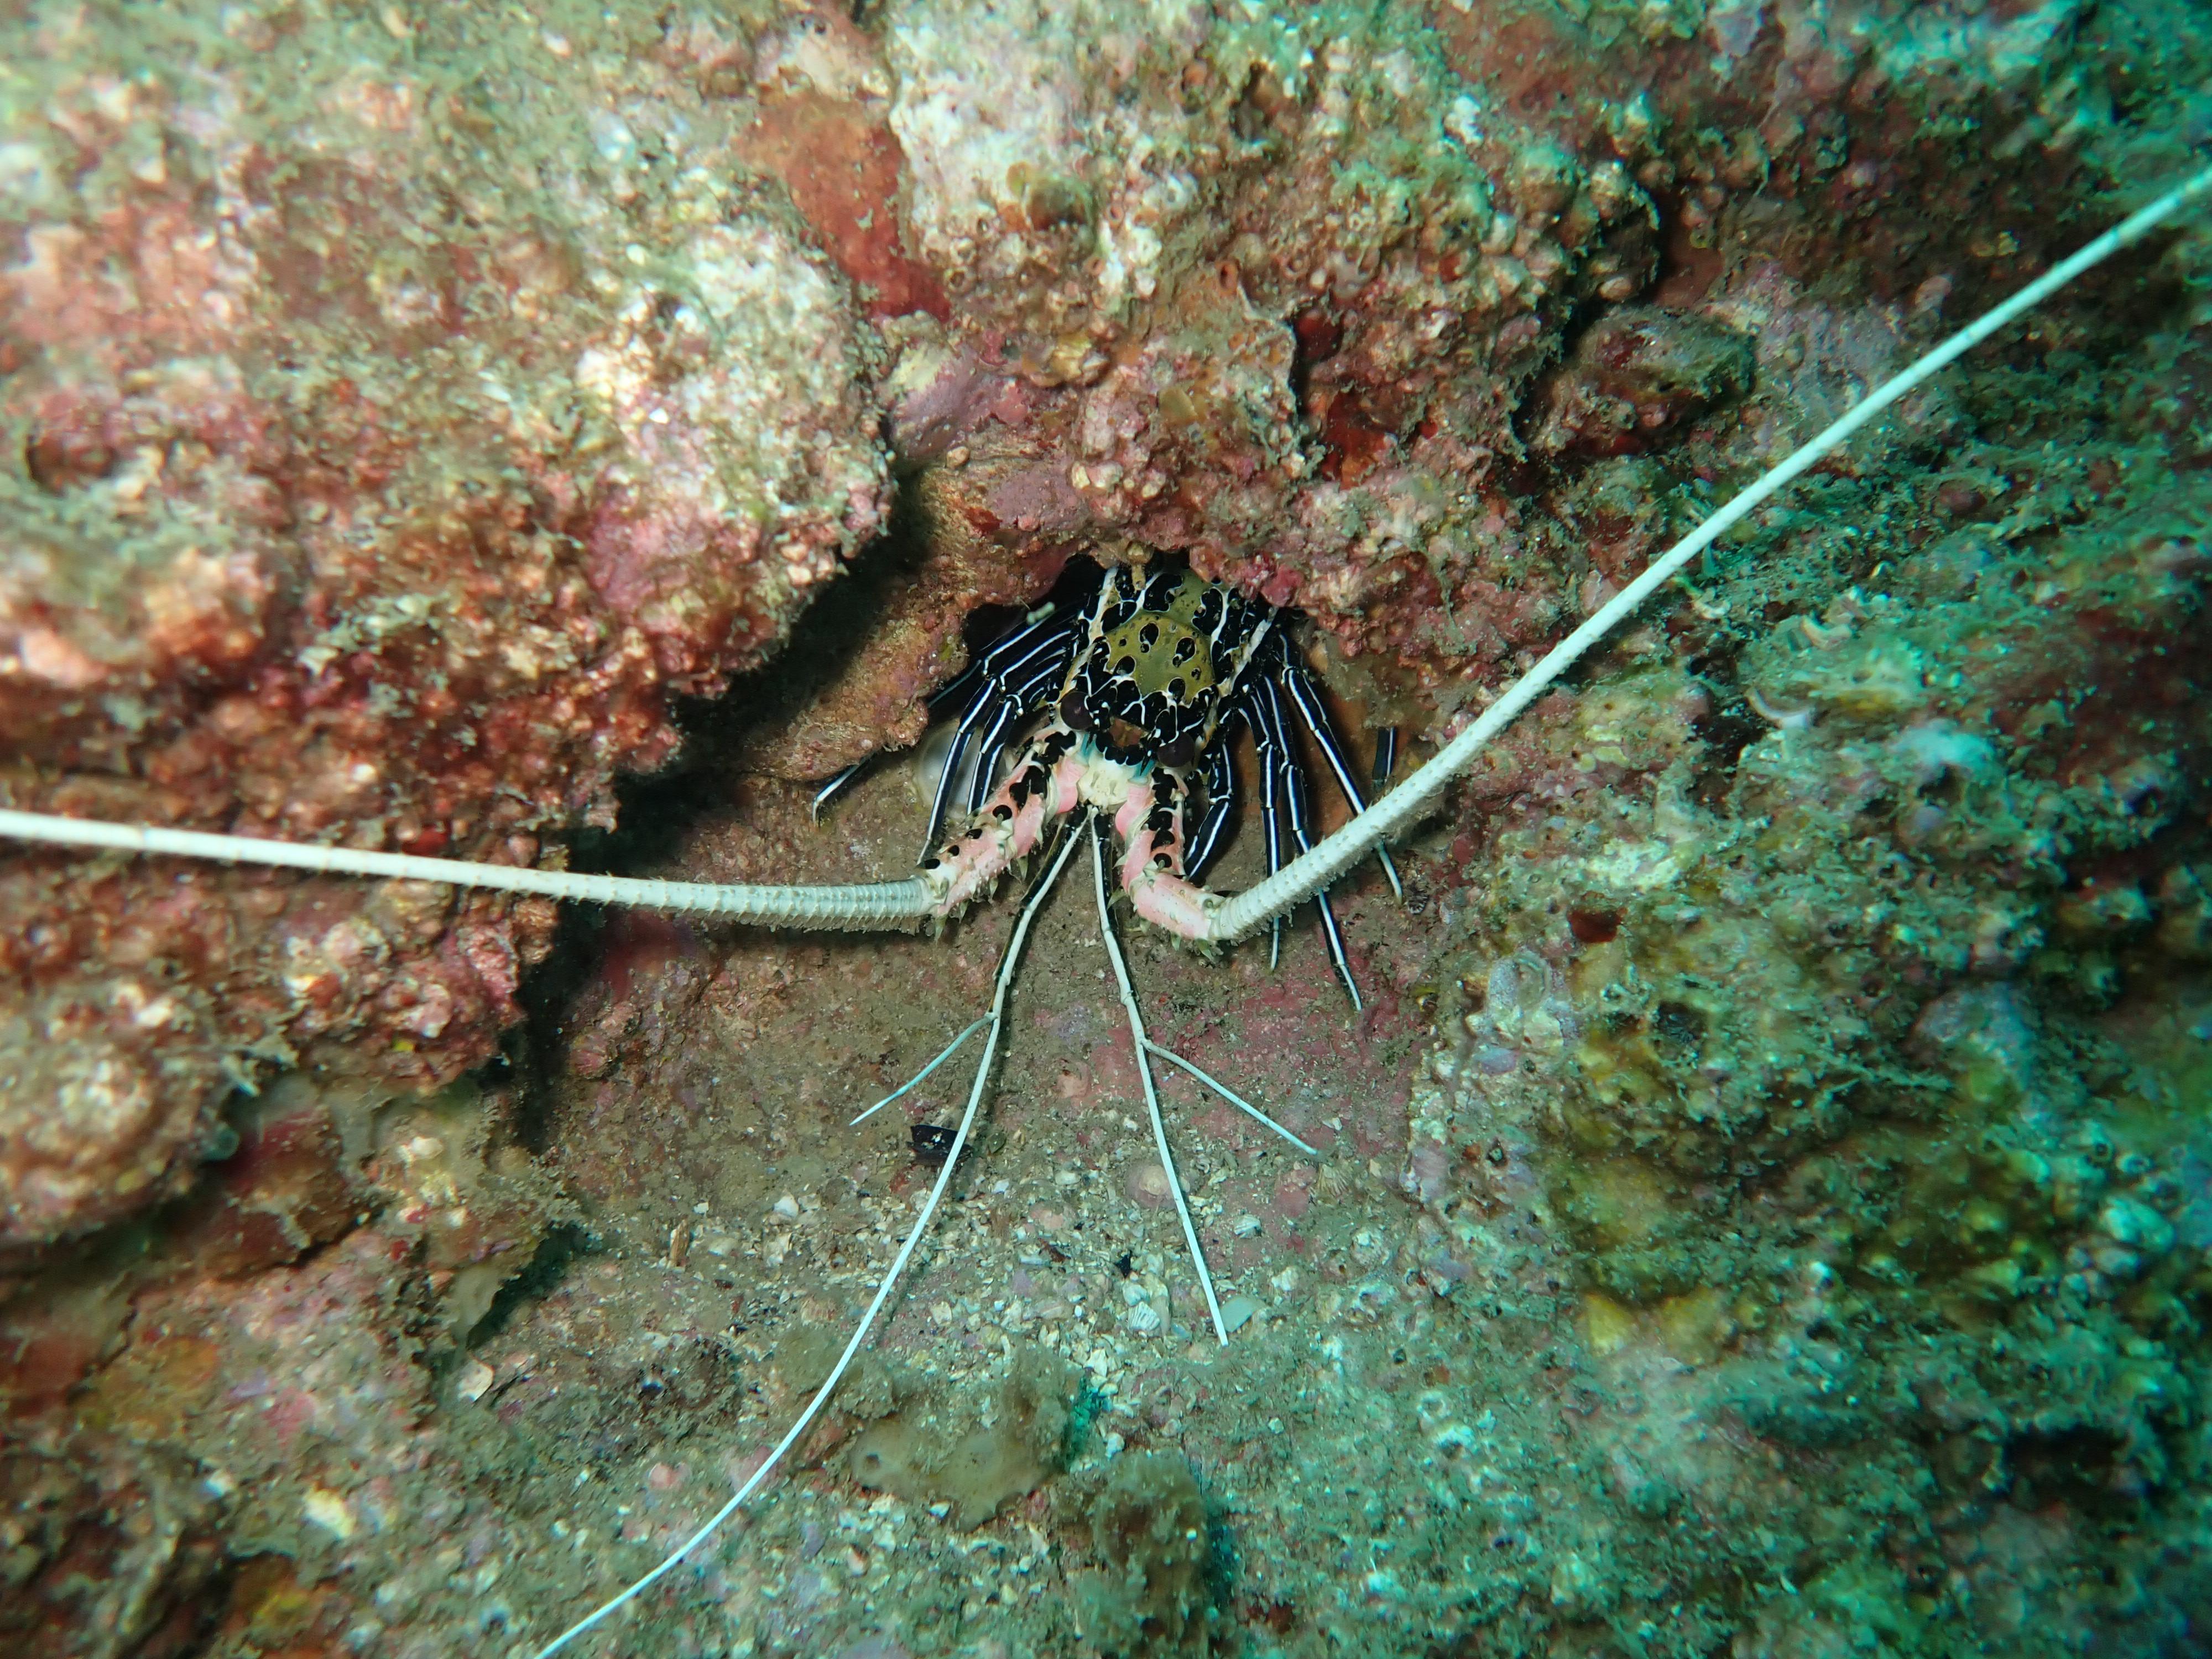 The Agriculture, Fisheries and Conservation Department announced today (December 3) that the results of the Hong Kong Reef Check this year showed that local corals are generally in a healthy condition and that the species diversity remains on the high side. Photo shows a lobster at Long Ke Wan.